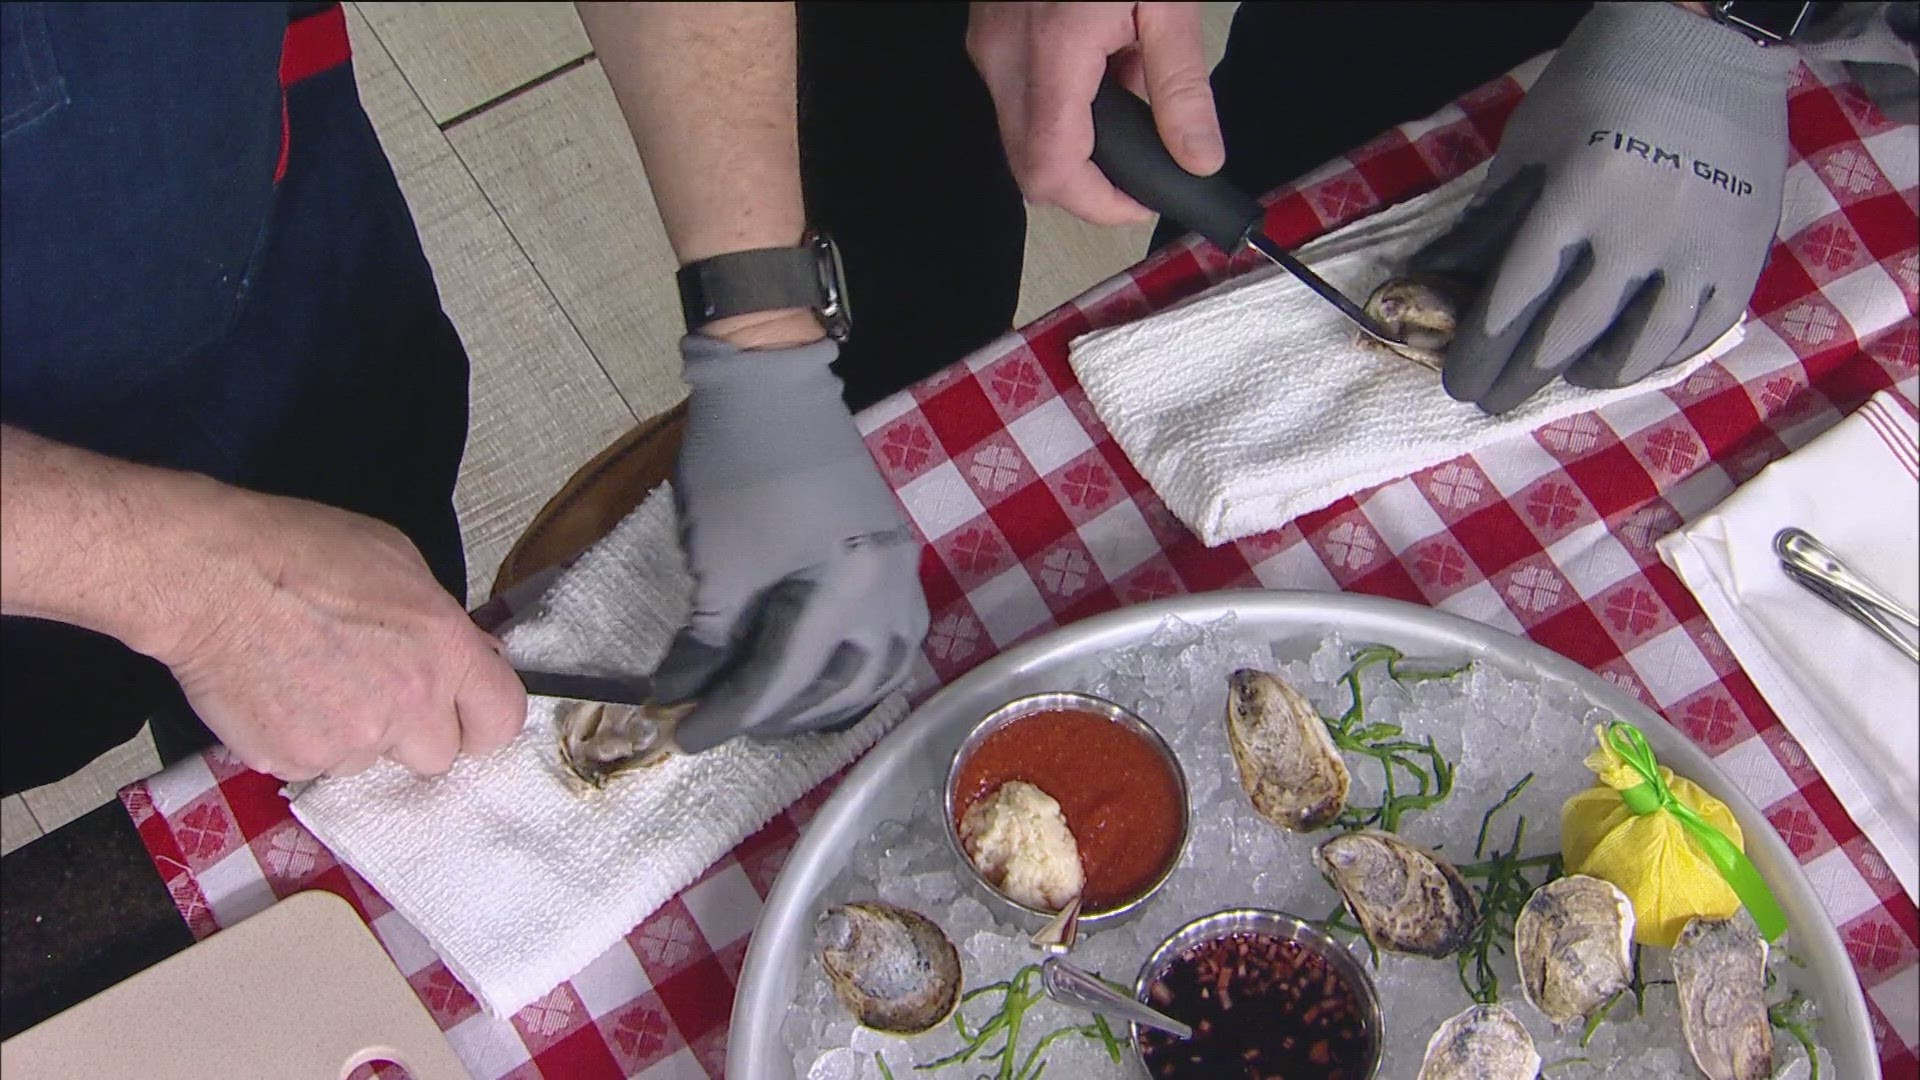 Each class includes a dozen oysters to shuck and eat, beverages, one-on-one training, and an oyster knife and glove to take home.